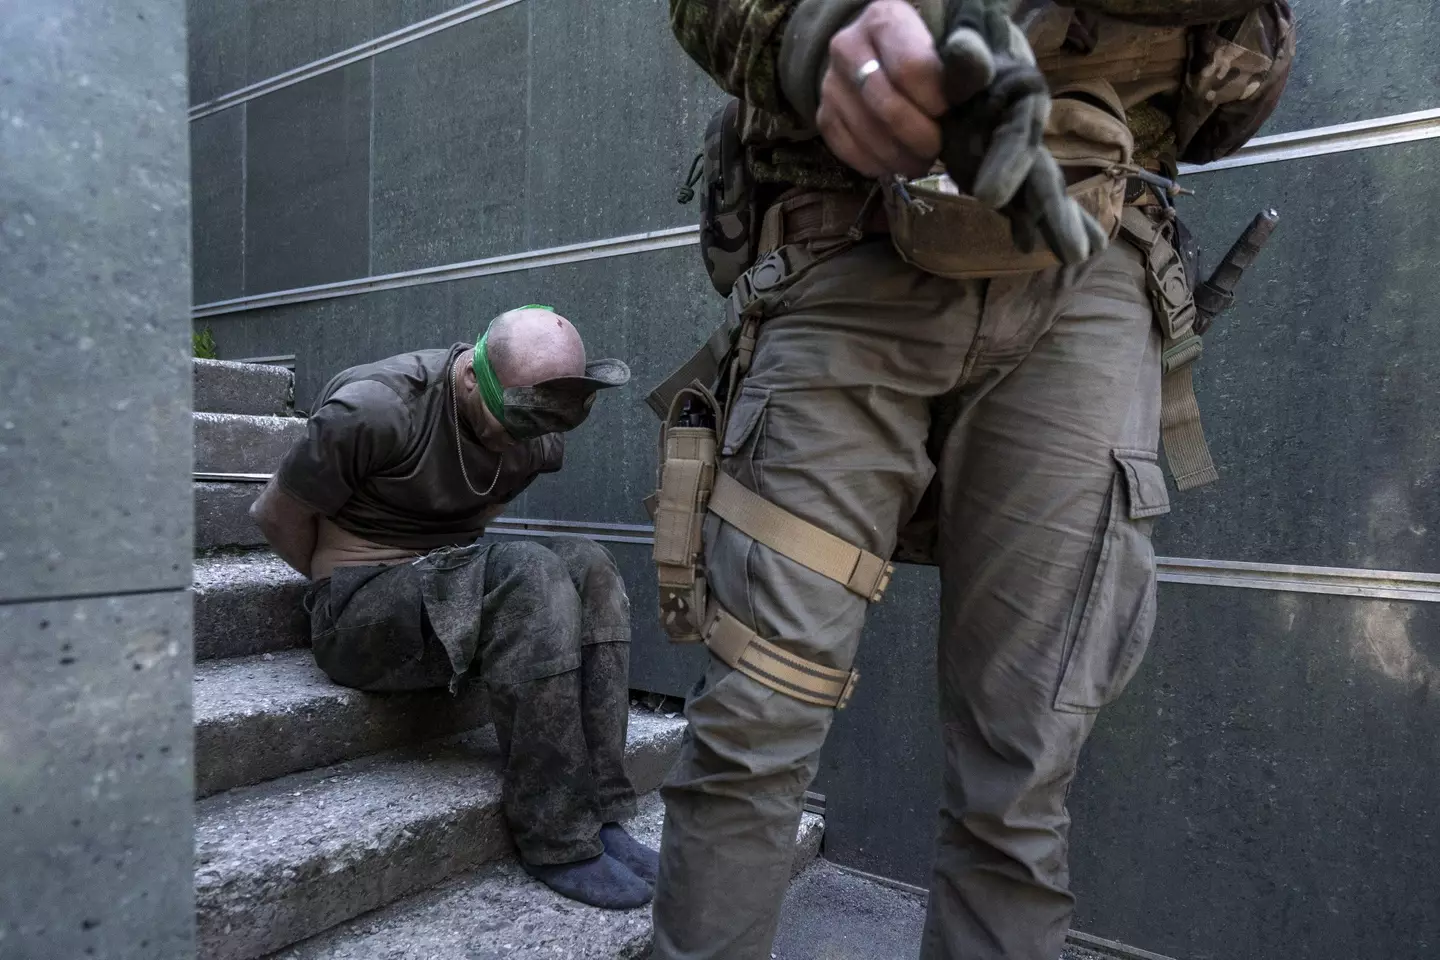 A Russian soldier being captured by Ukrainian forces.